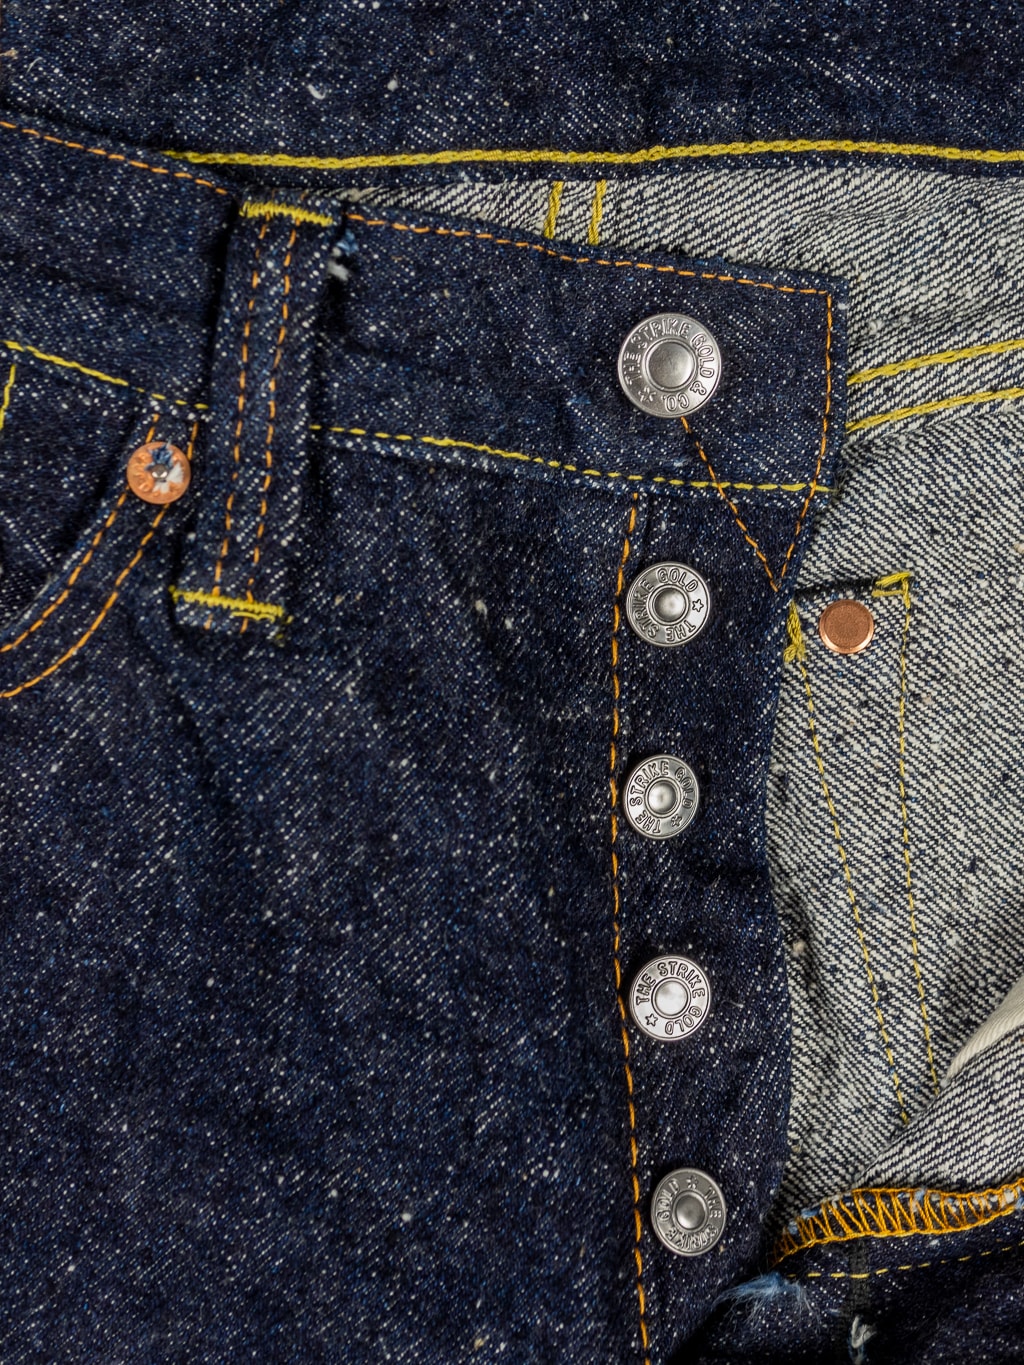 The Strike Gold Keep Earth Natural Indigo Jeans iron buttons